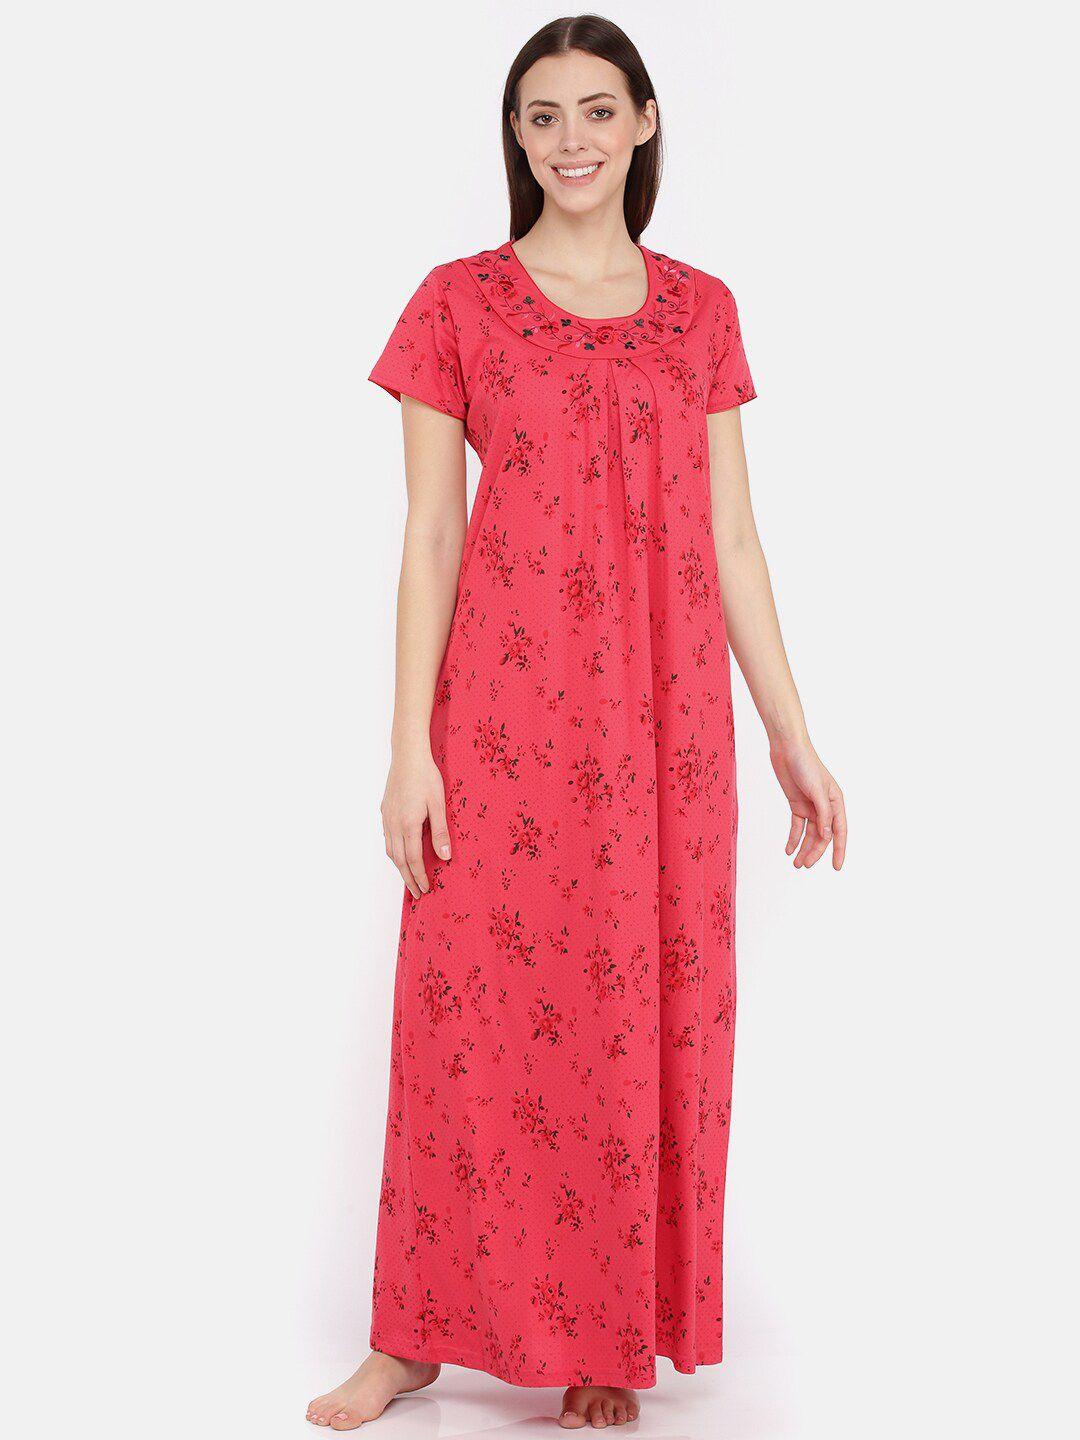 9shines label women pink & red floral embroidered nightdress